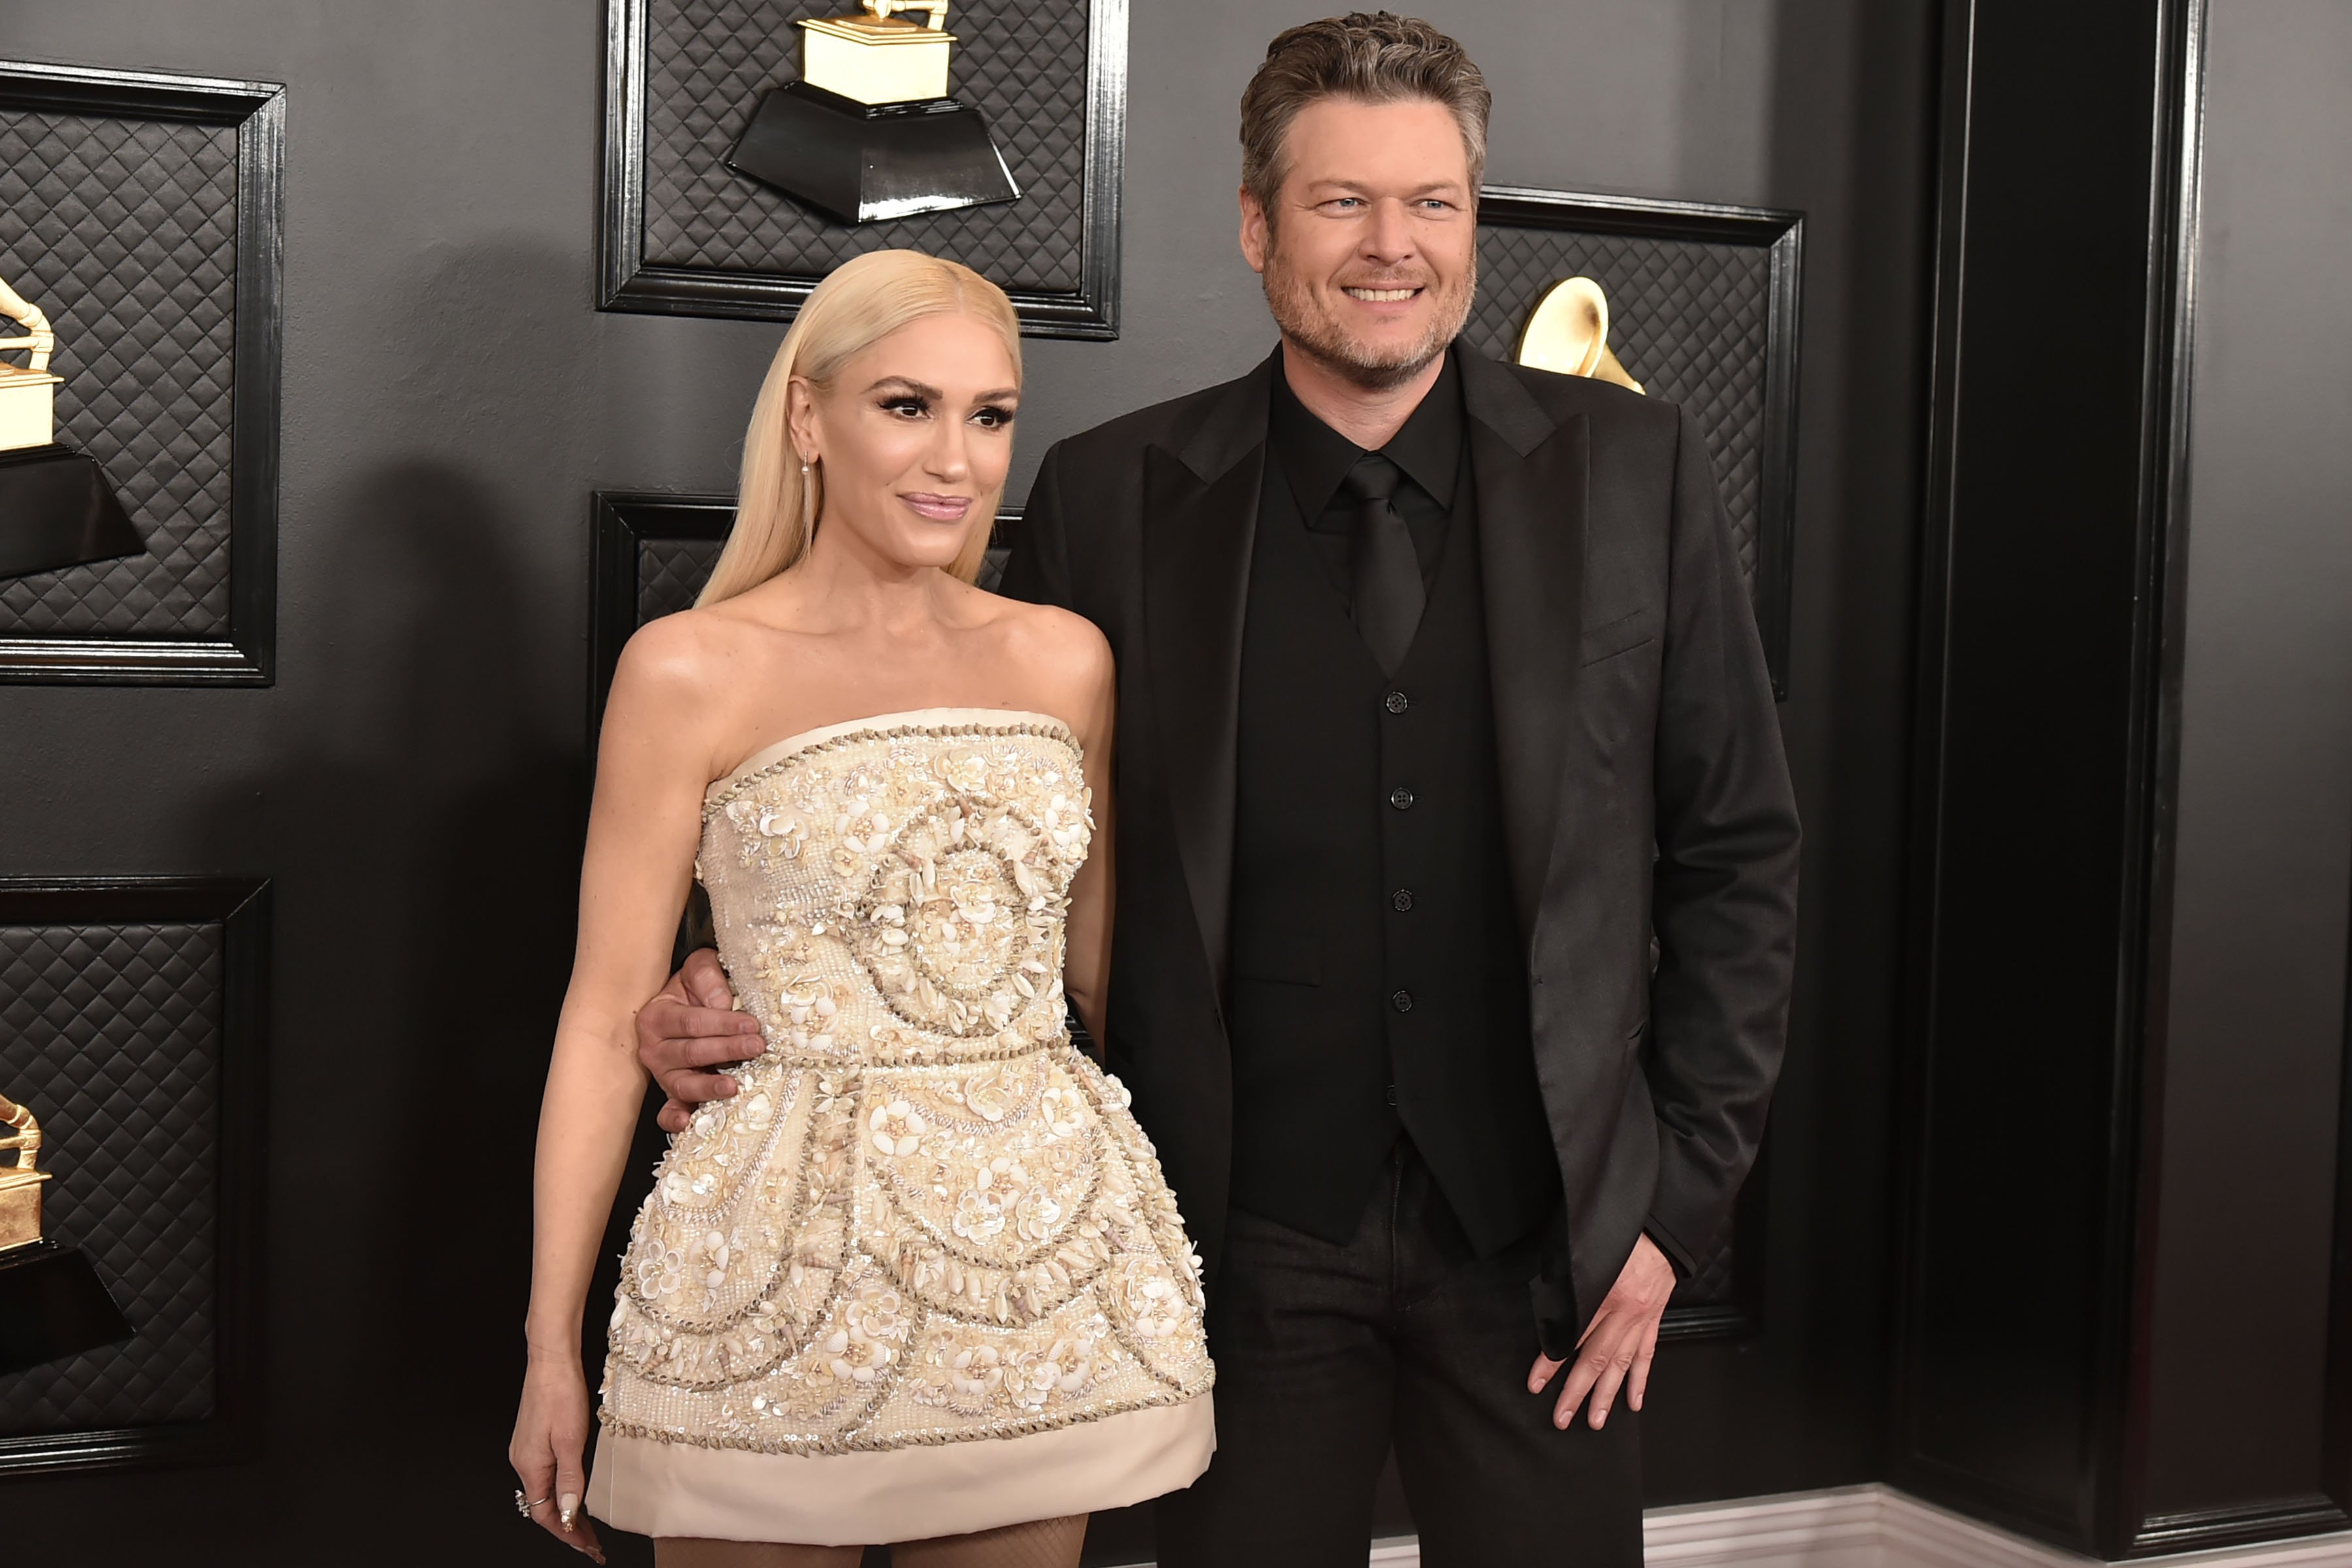 Gwen Stefani and Blake Shelton looking splendid, at the 2020 Grammy Awards in L.A., January, 2020. | Photo: Getty Images